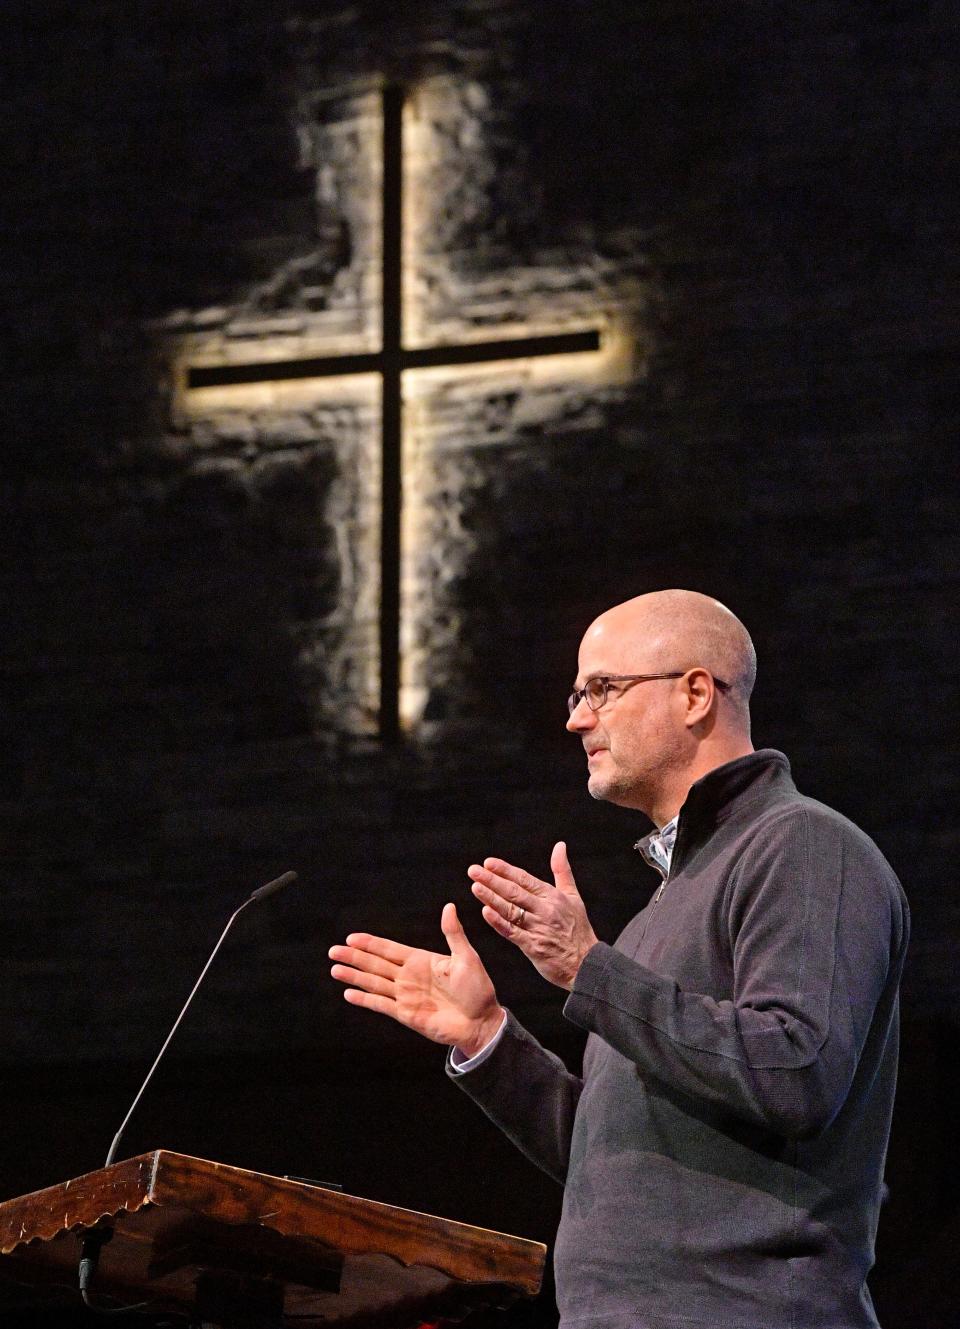 Rev. Scott Sauls, senior pastor of Christ Presbyterian Church in Nashville. Sauls, a prominent evangelical Christian author, is on a disciplinary hiatus following an inquiry by the Nashville Presbytery into workplace issues at Christ Presbyterian.